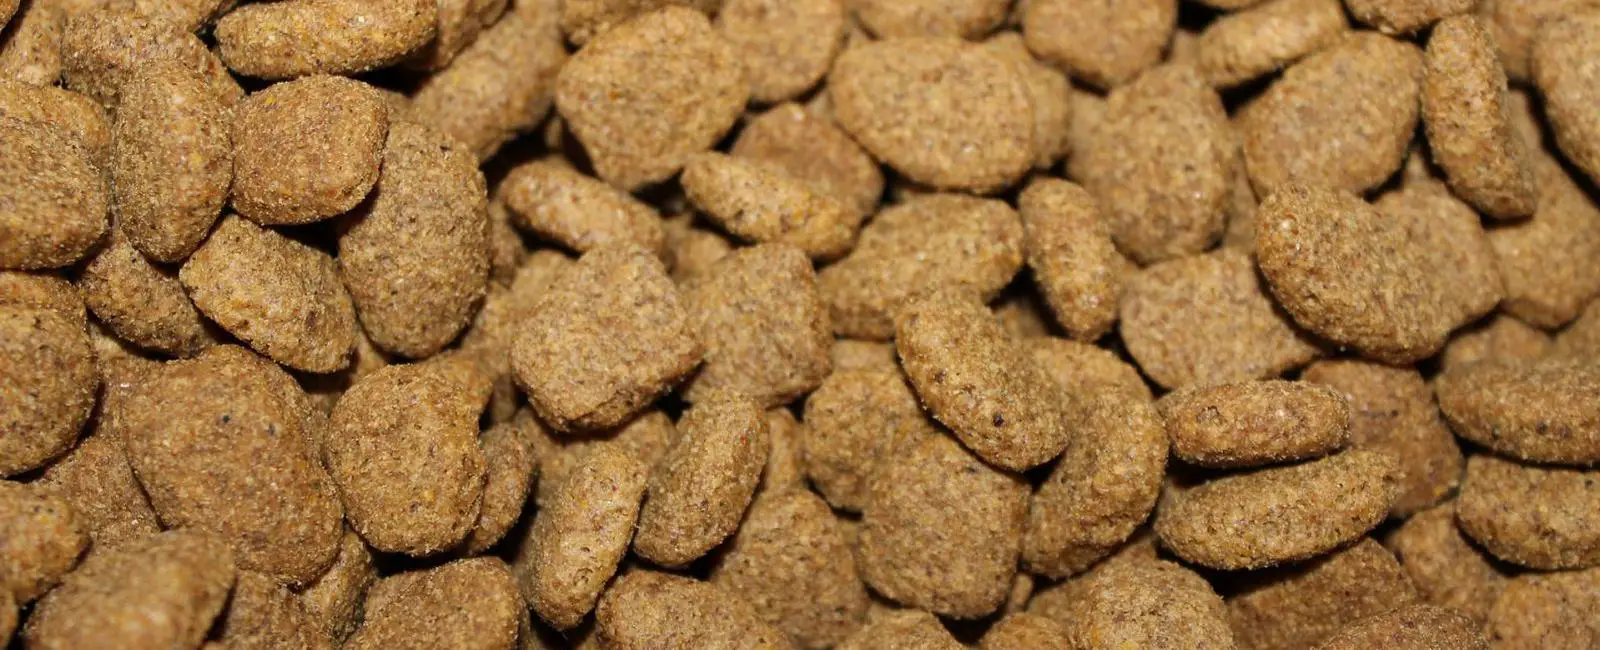 How Many Cups Are in a Pound of Dog Food? | Woof & Beyond